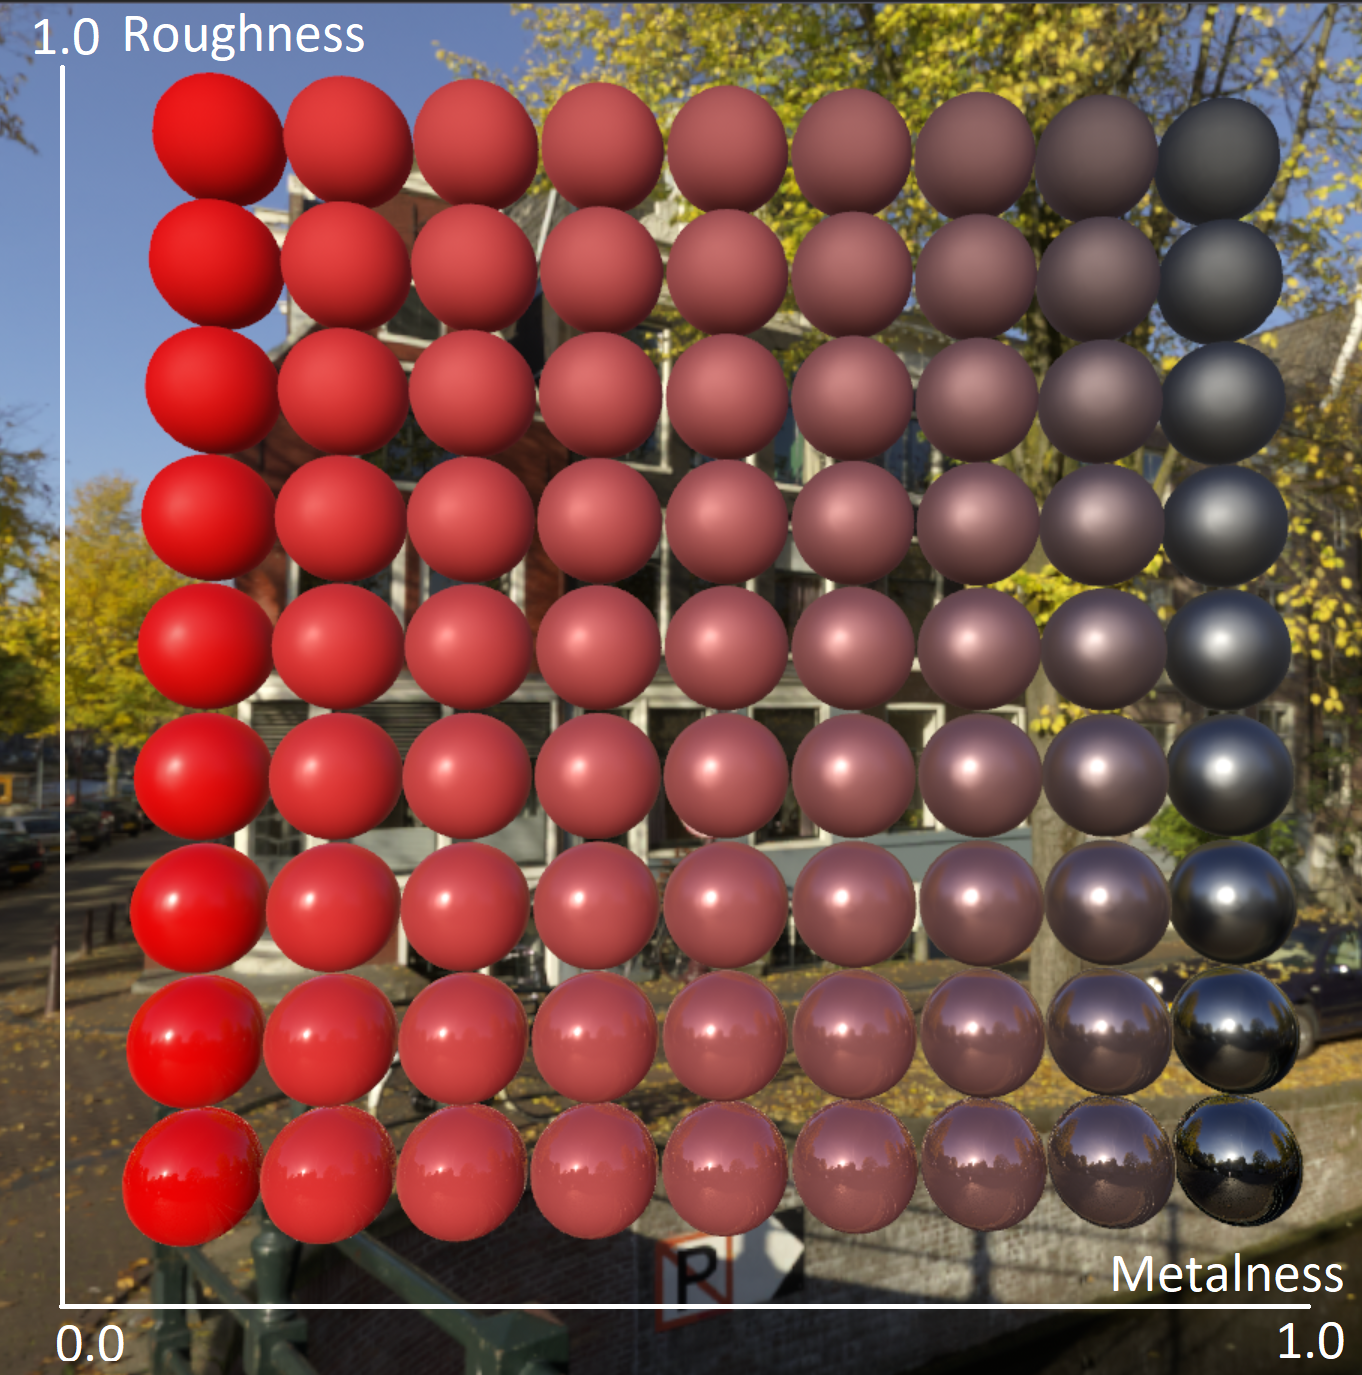 Spheres rendered with different metalness and roughness values